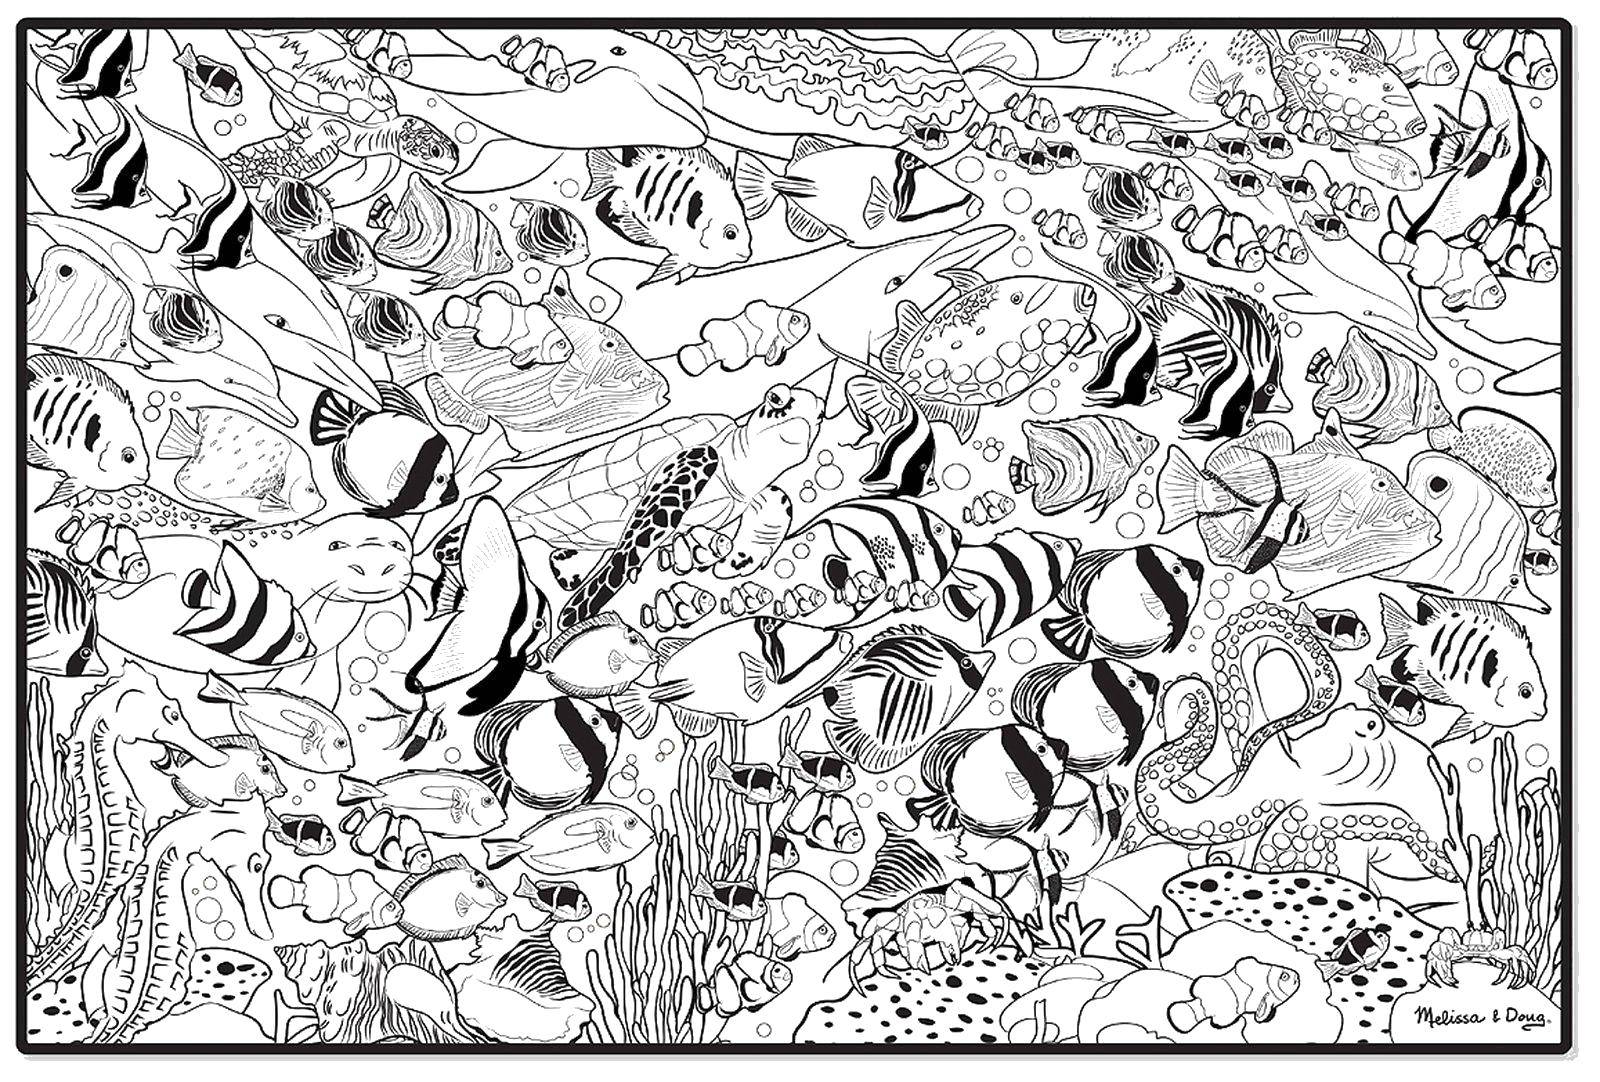 Coloring Many different fish. Category sea animals. Tags:  sea animals, water people, sea.